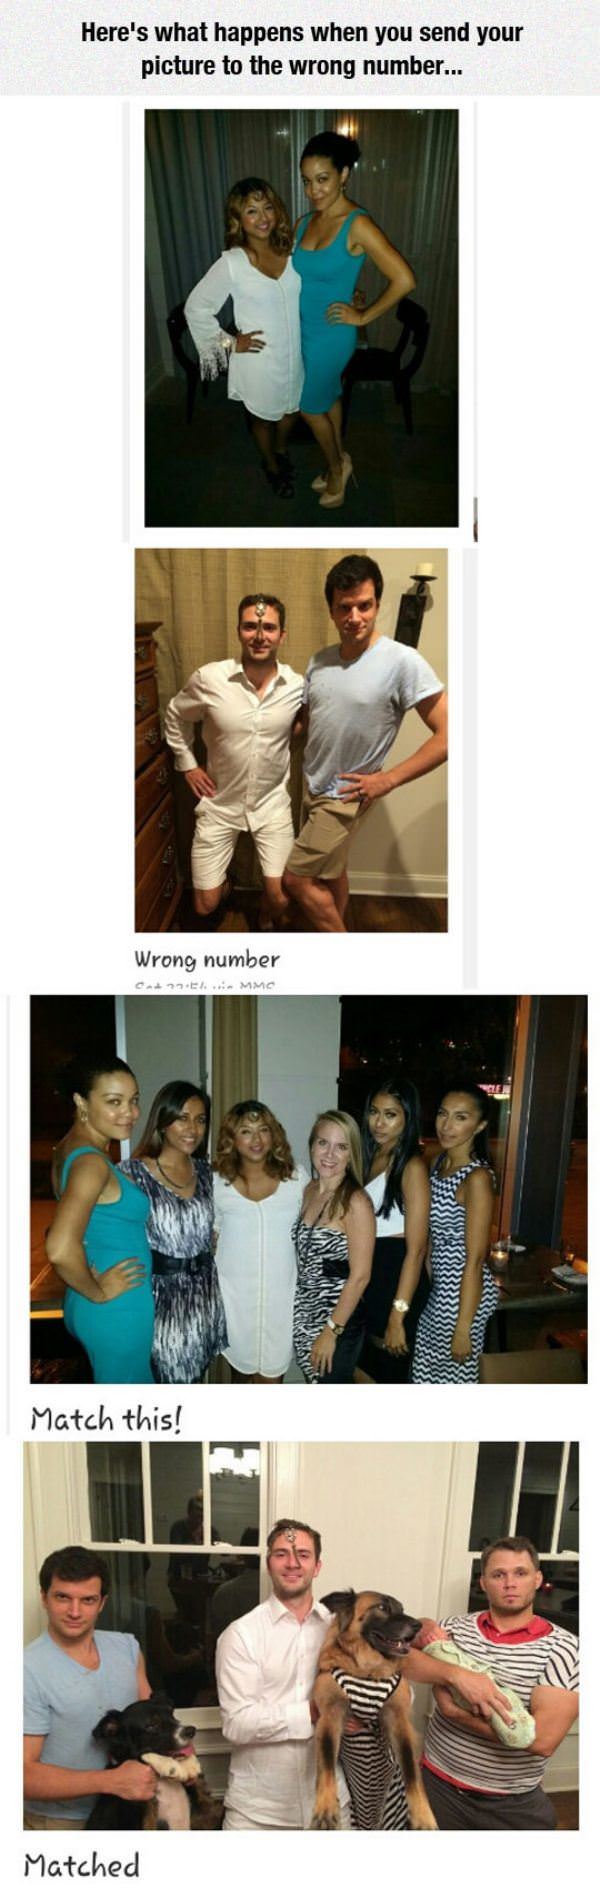 wrong number funny picture